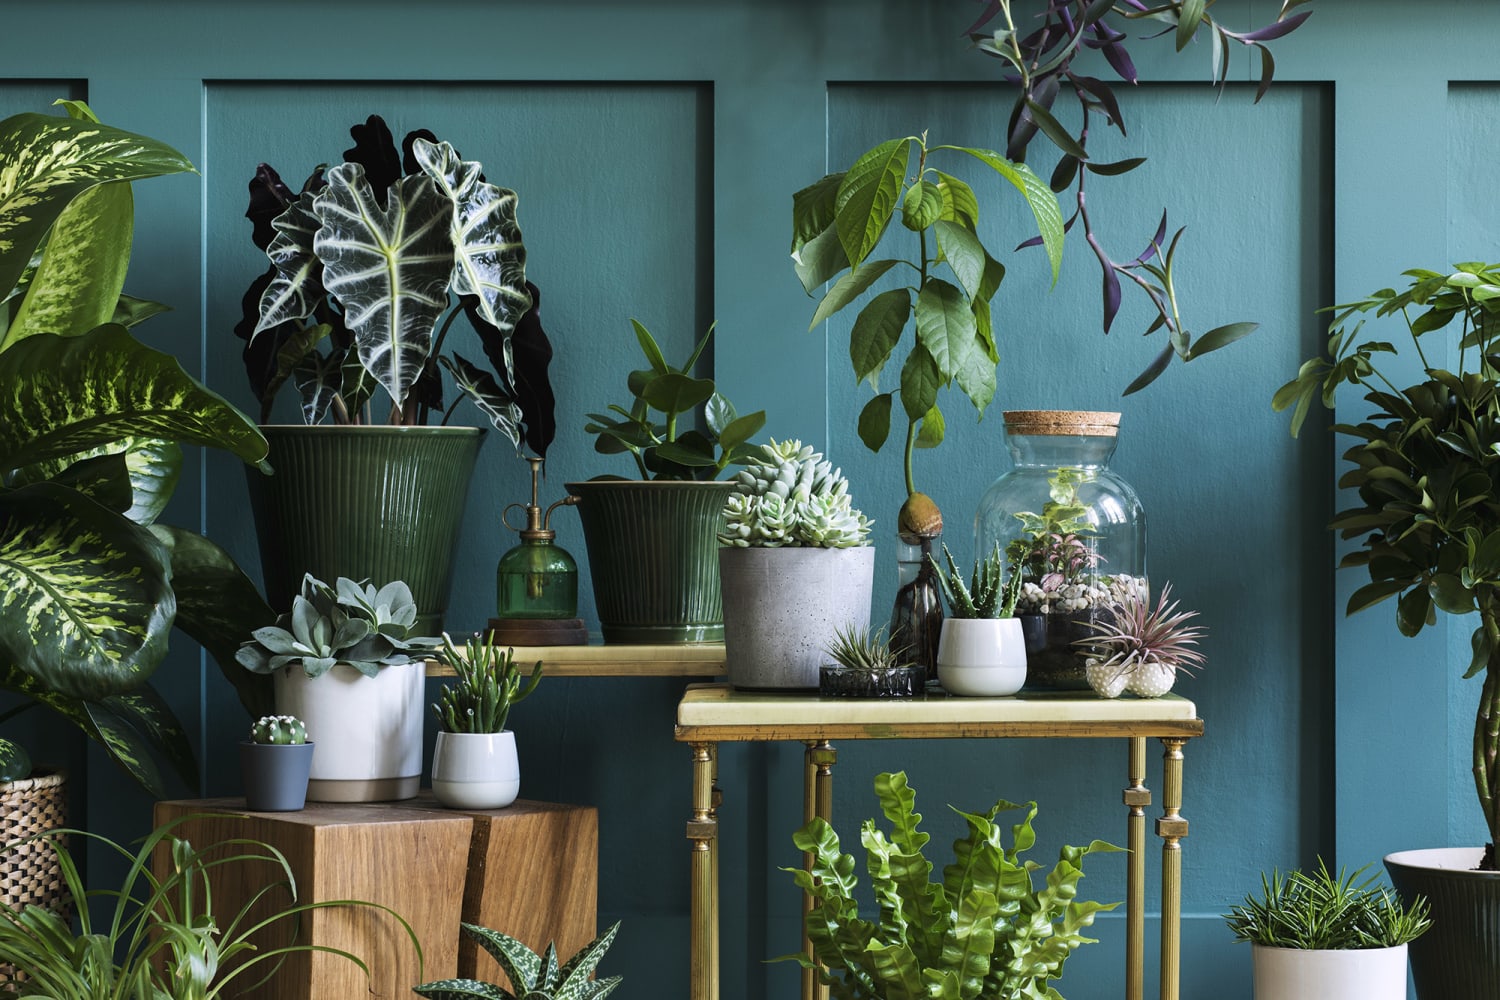 Timelapse Videos Show How Much Our Houseplants Move in a Day